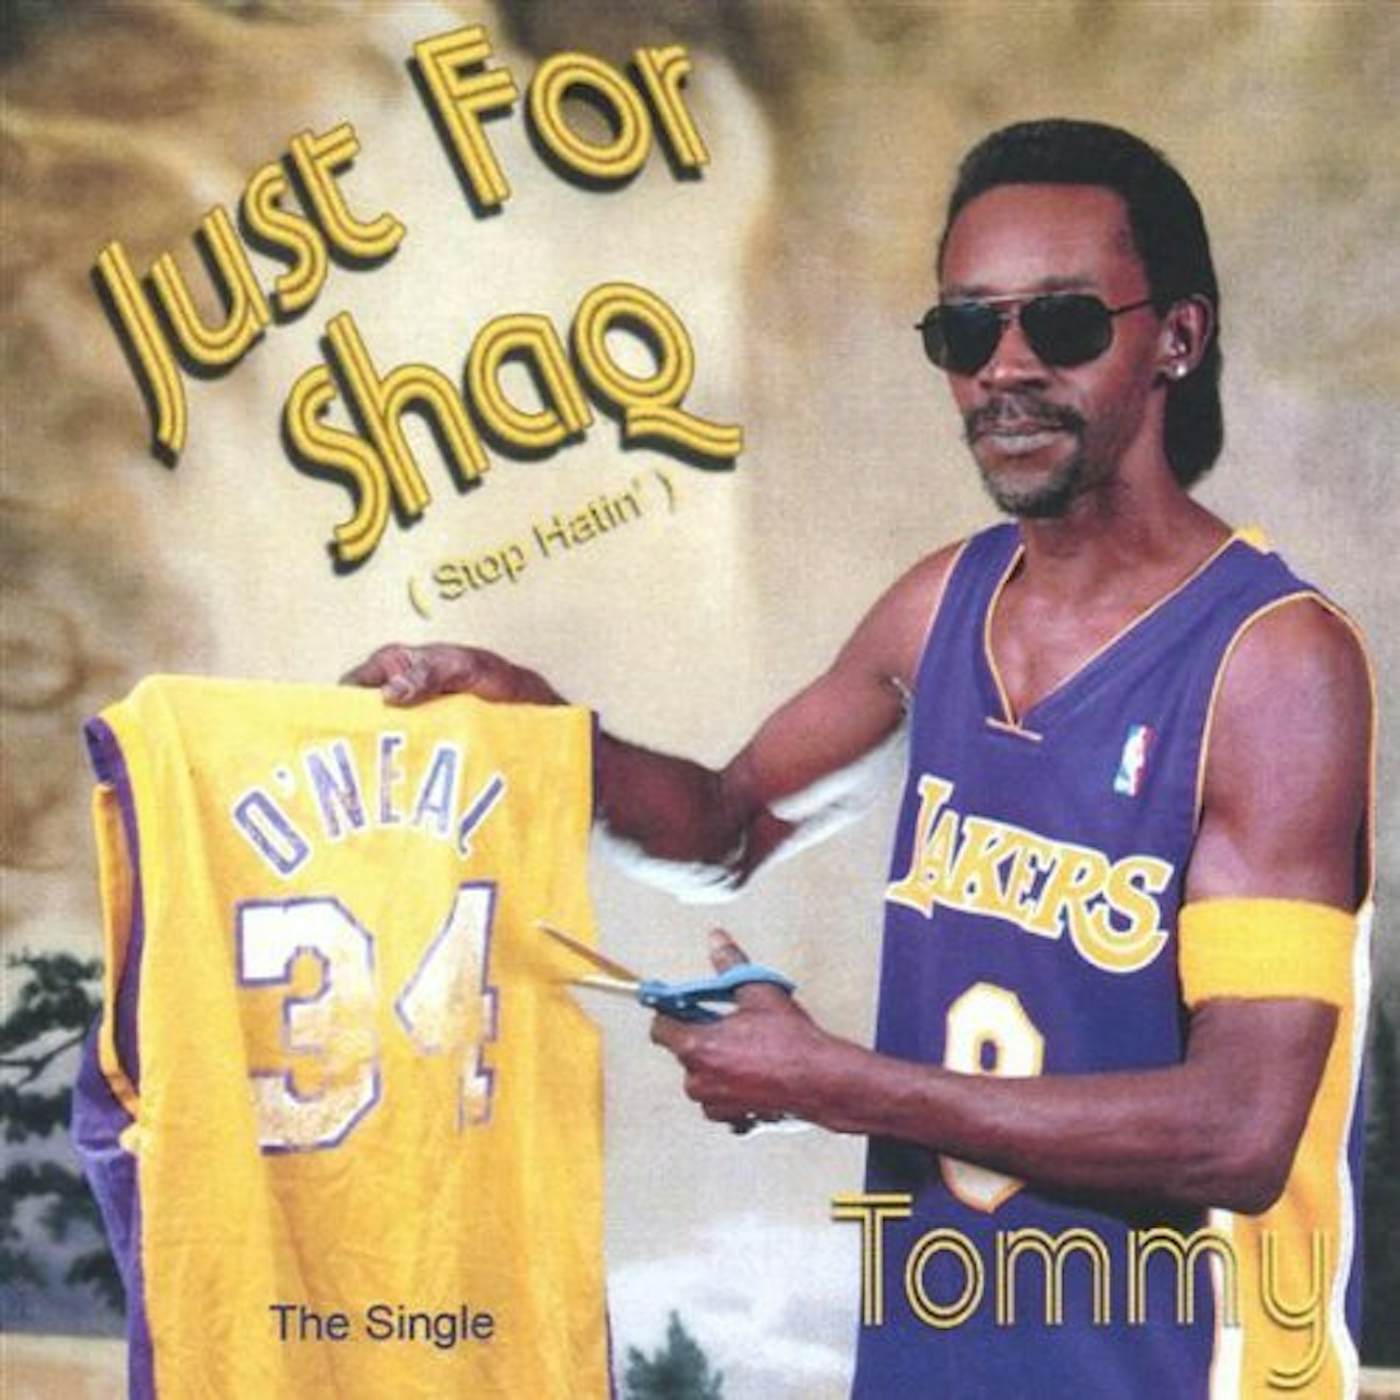 Tommy JUST FOR SHAQ CD